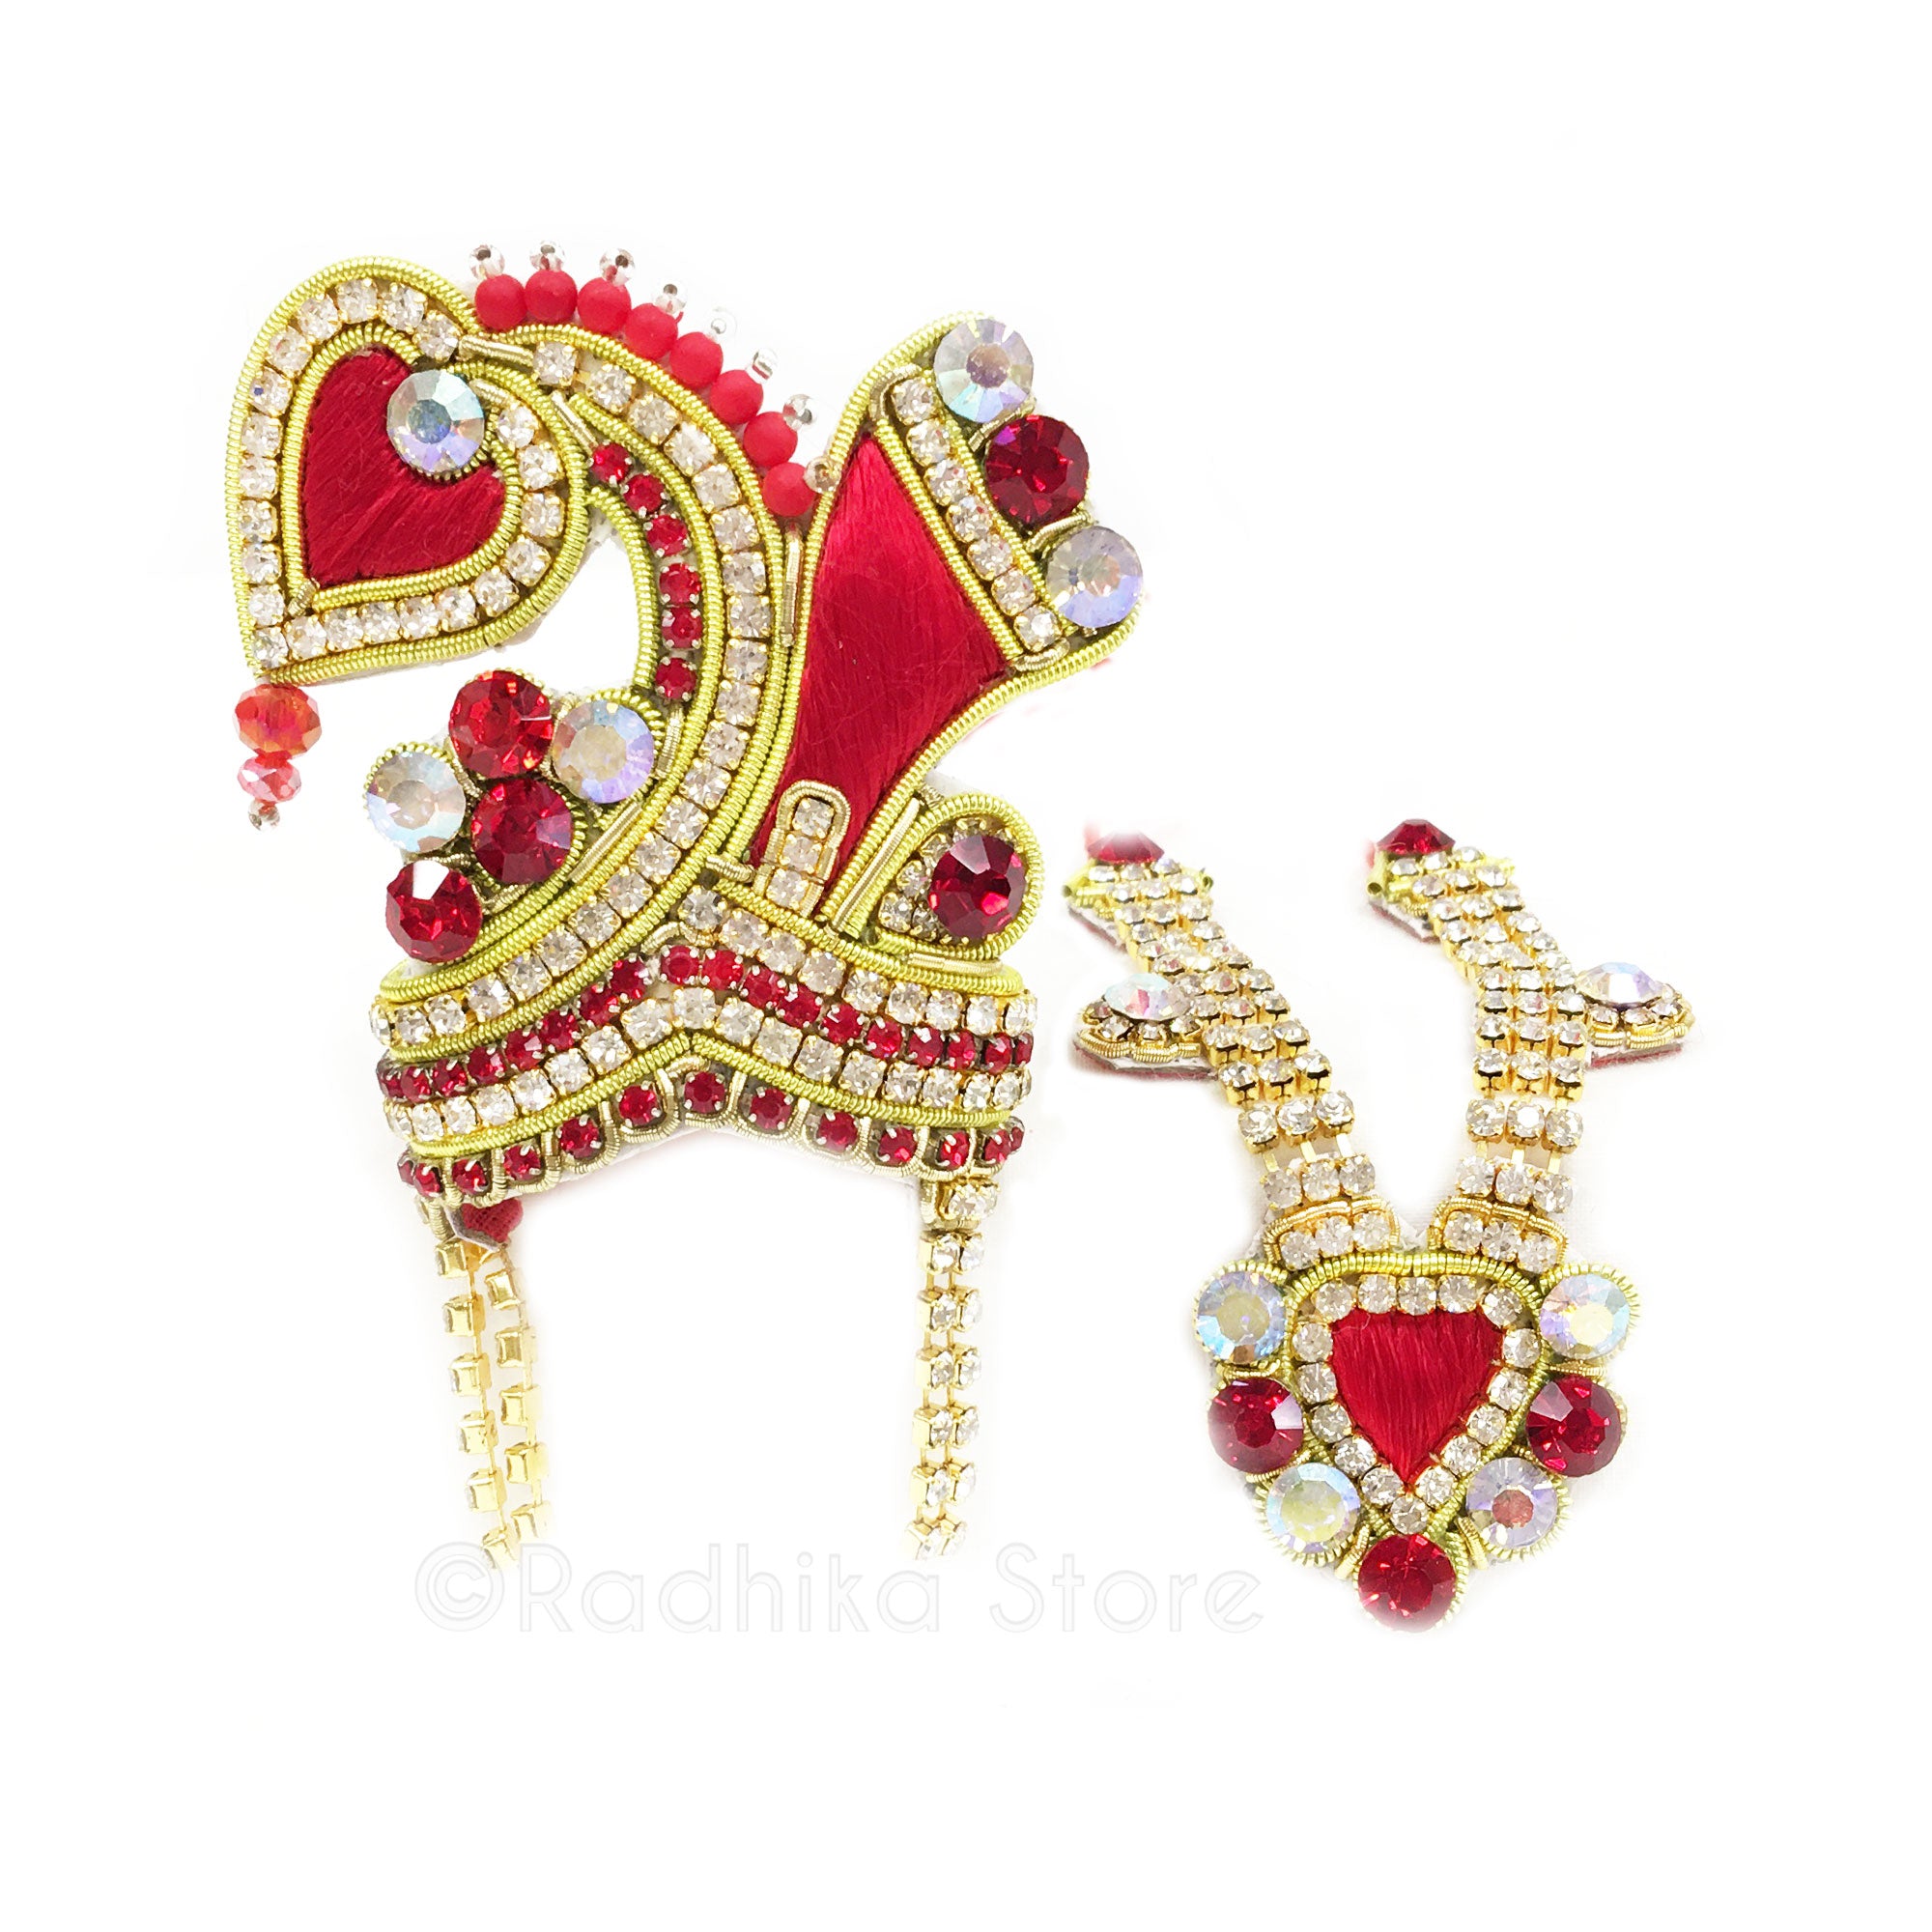 Heart of Vrindavan - Deity Crown and Necklace Set